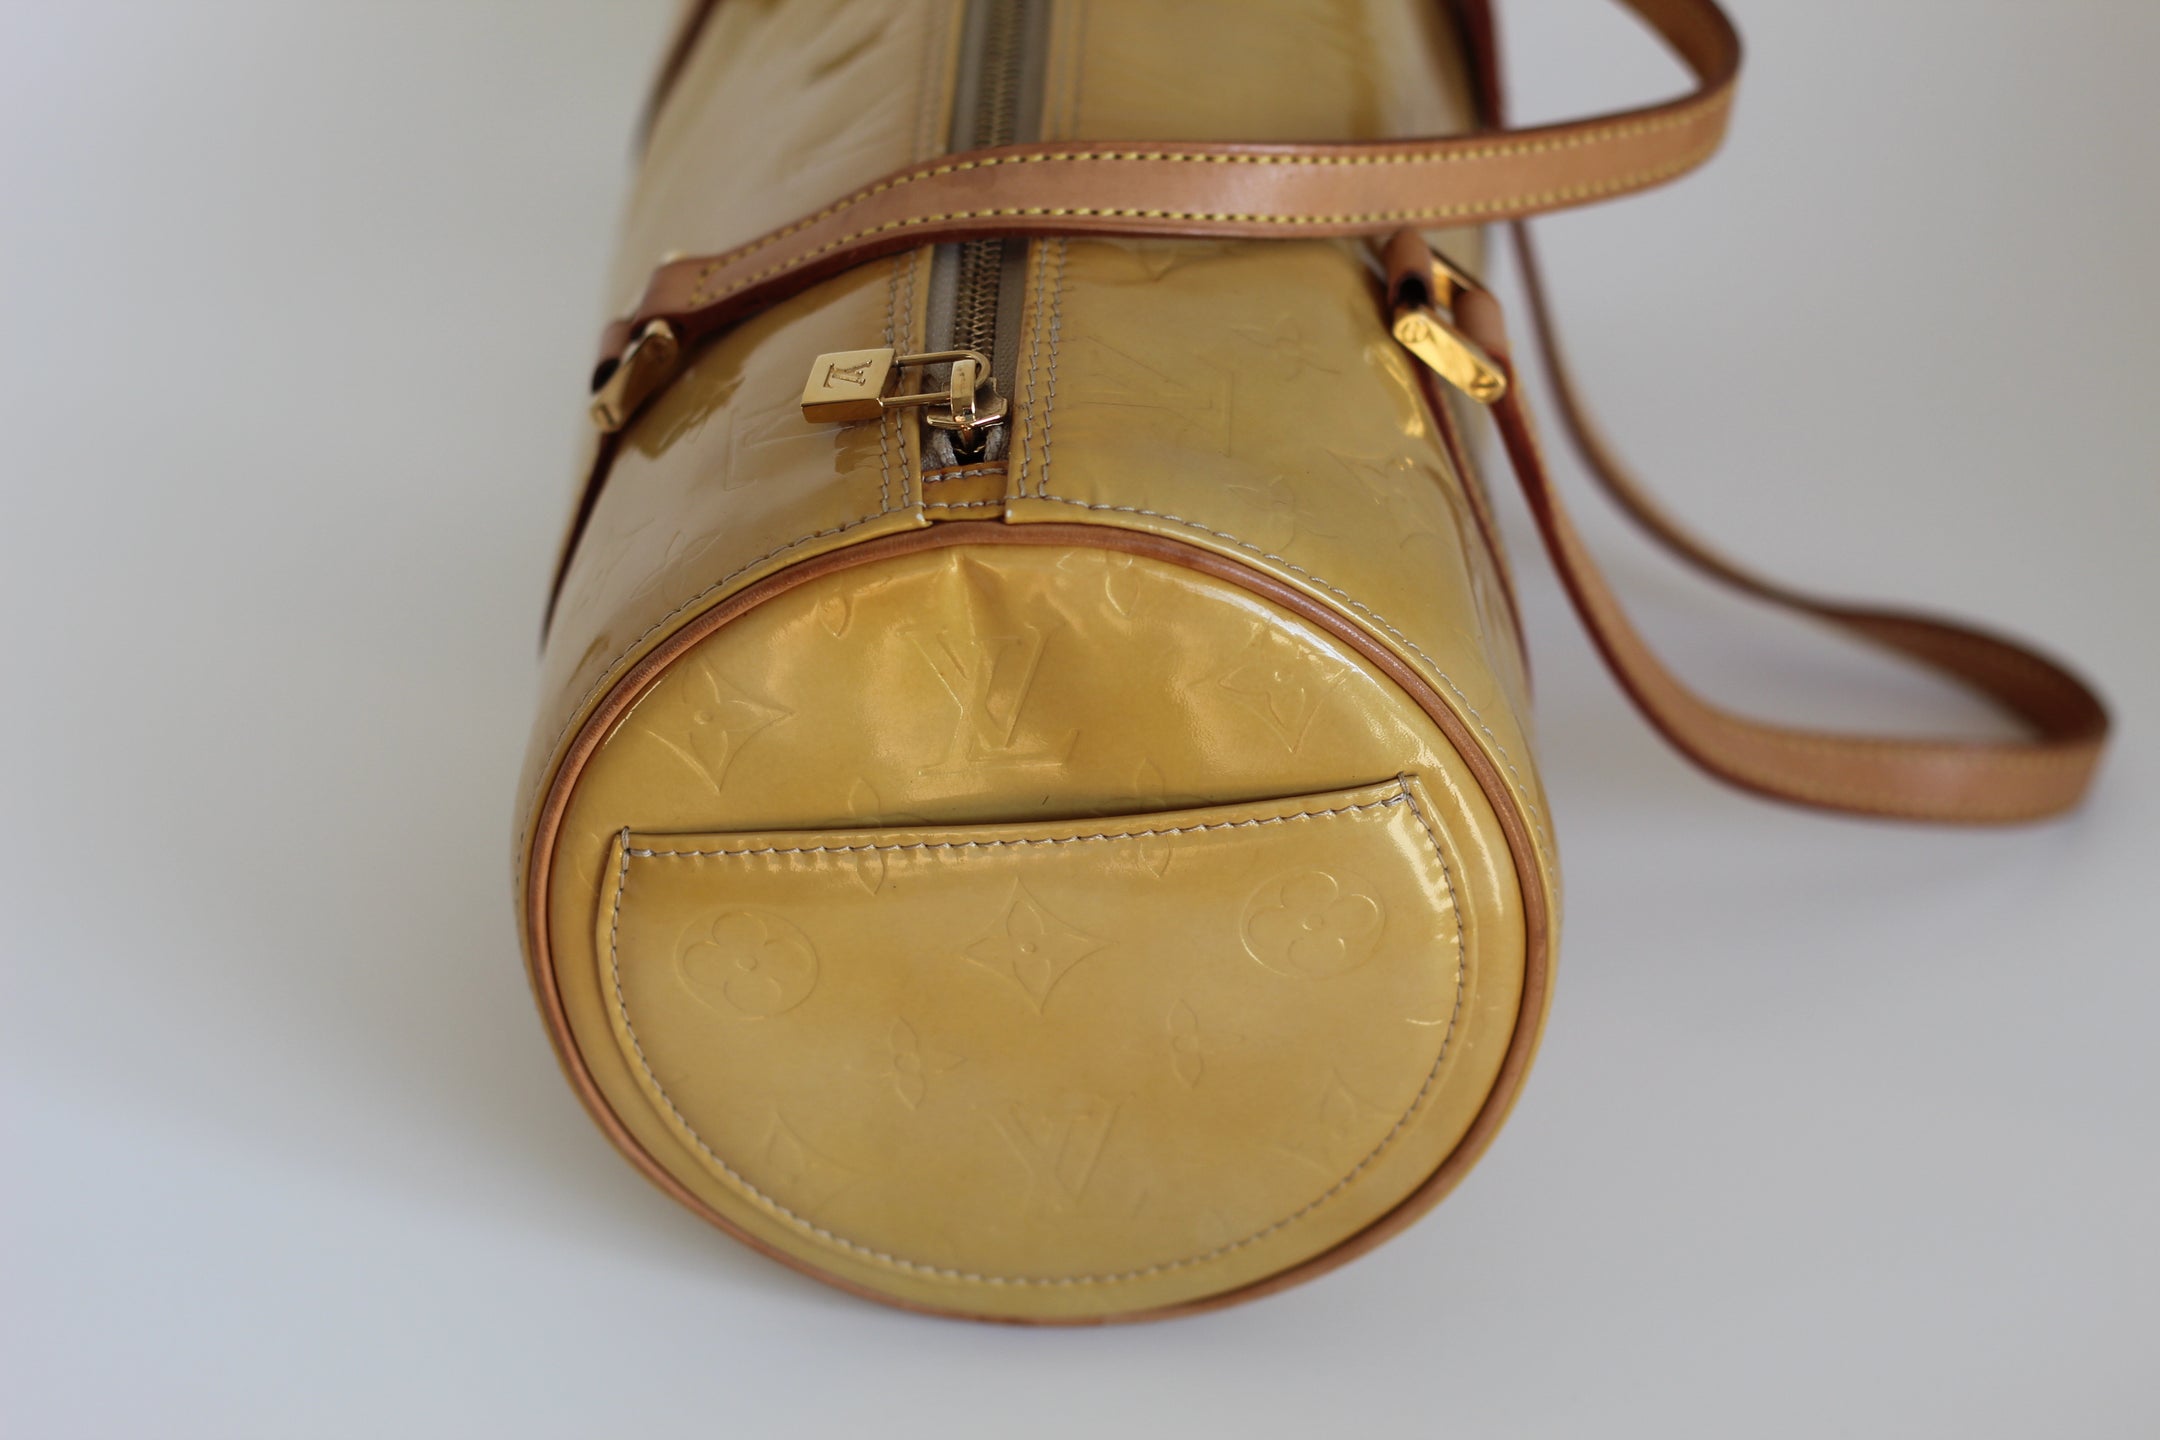 Bedford patent leather handbag Louis Vuitton Yellow in Patent leather -  37379603